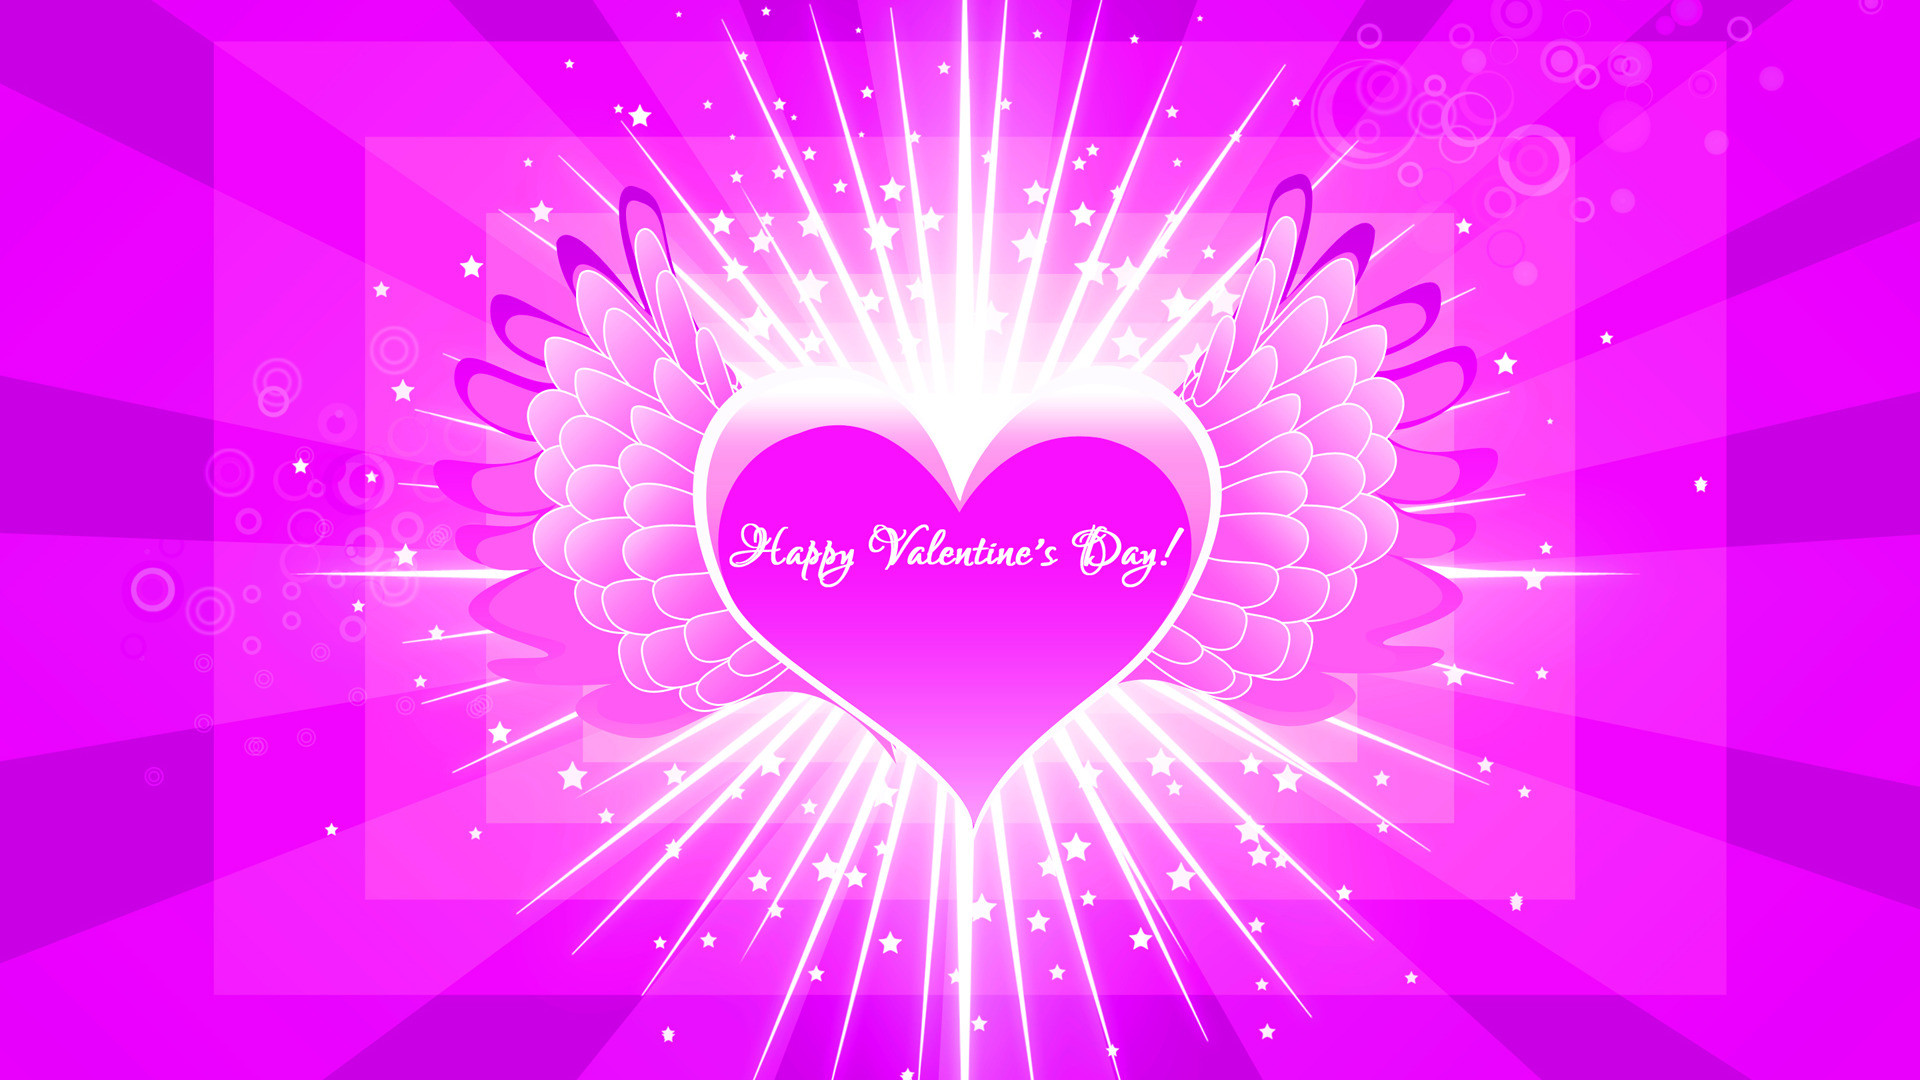 Happy Valentines Day 2022 Hd Wallpaper Images 1920x1080